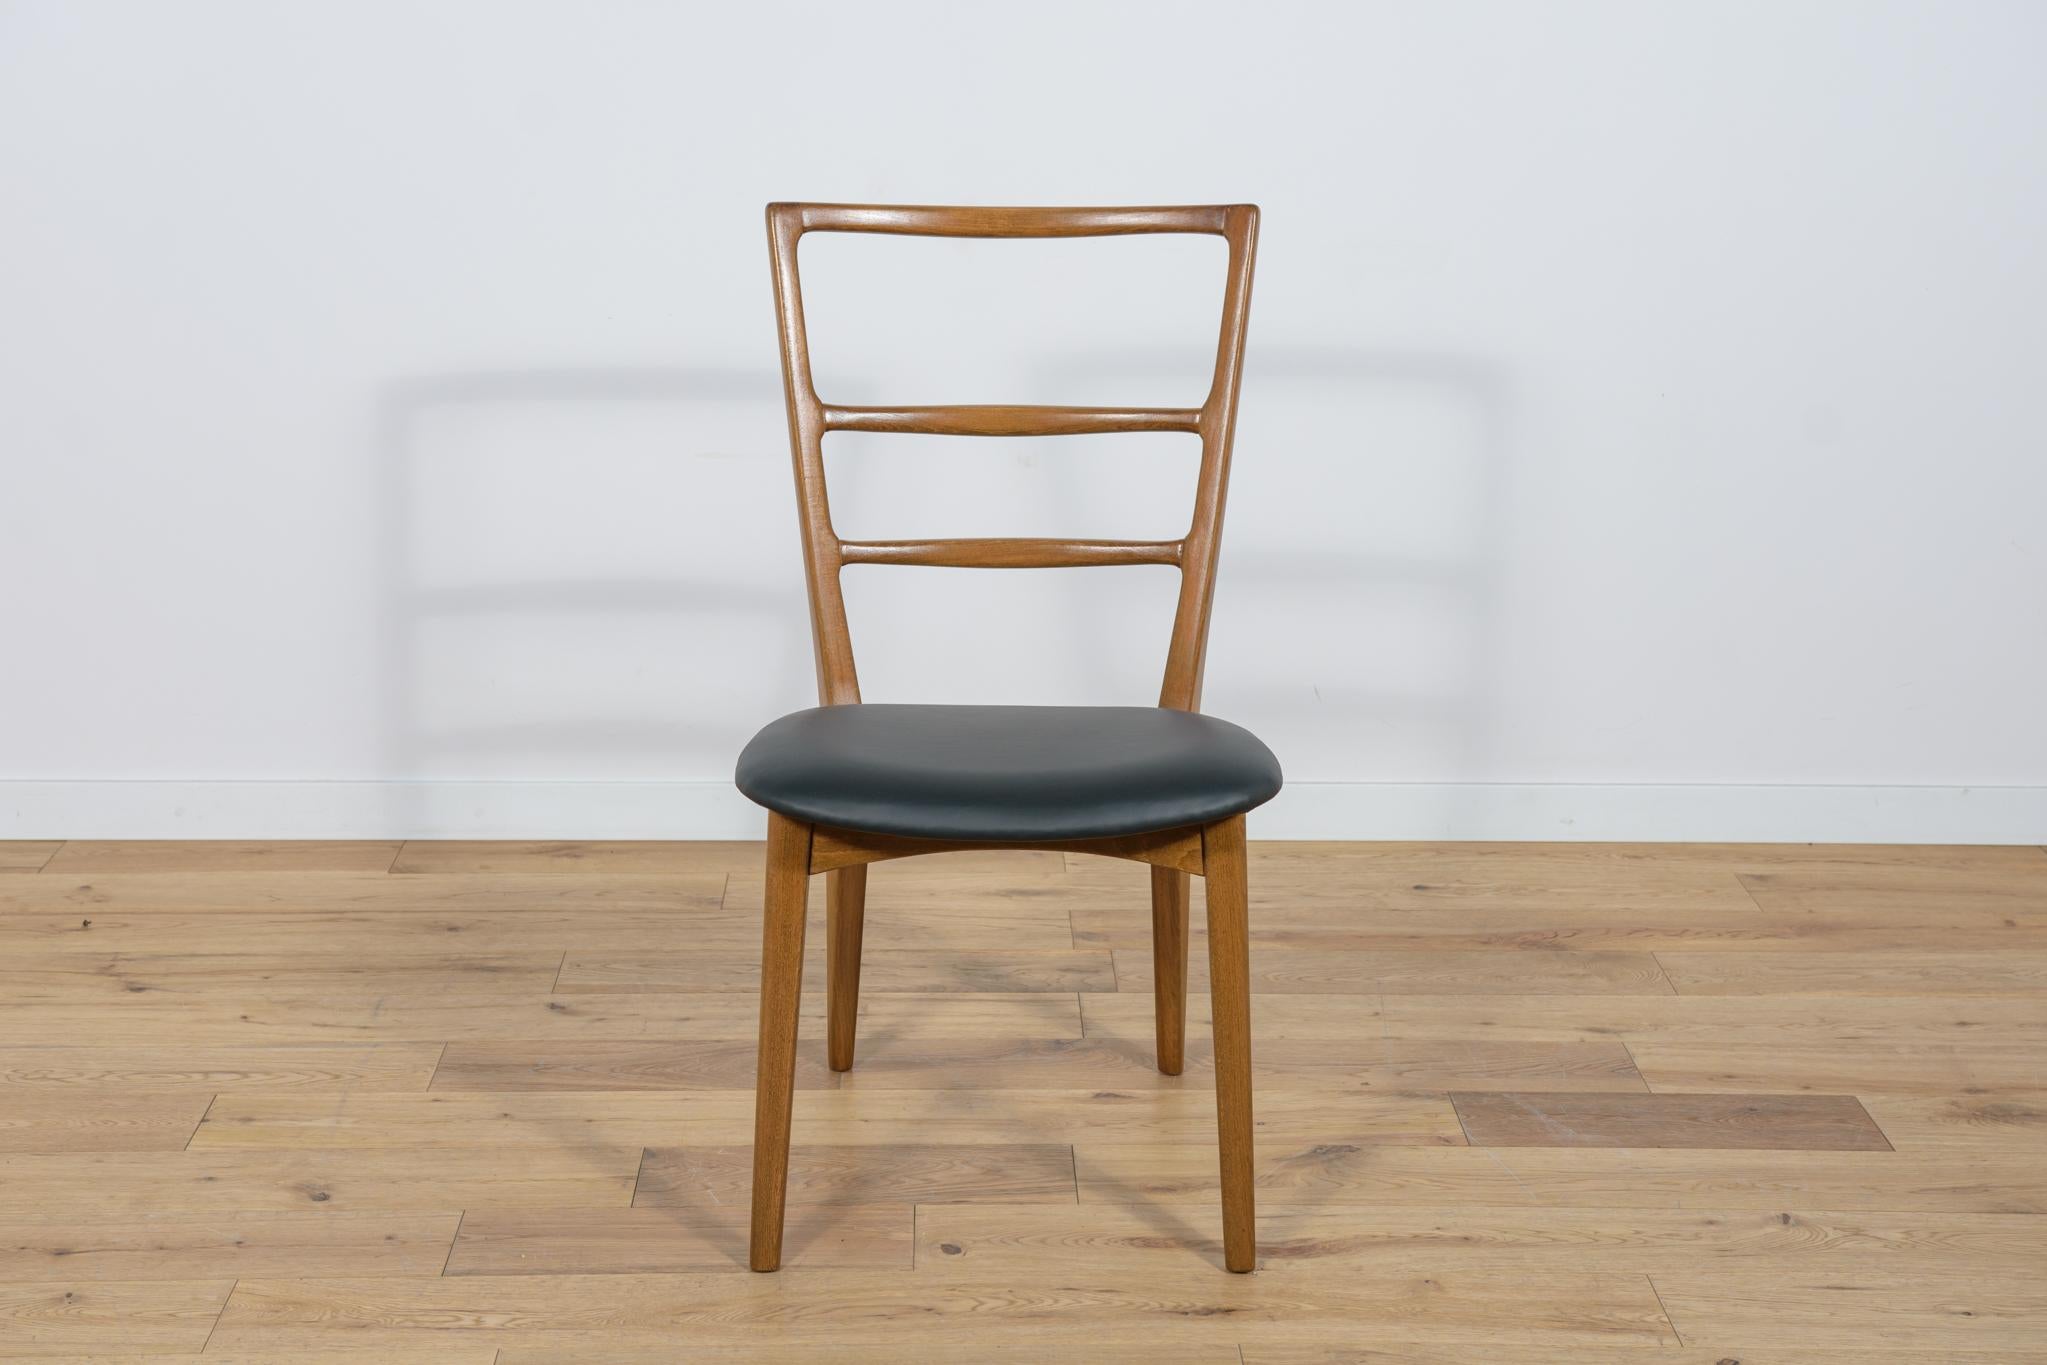 Mid-20th Century Dining Chairs by Mariana Grabiński for Swarzędz Factory, 1960s, Set of 4 For Sale